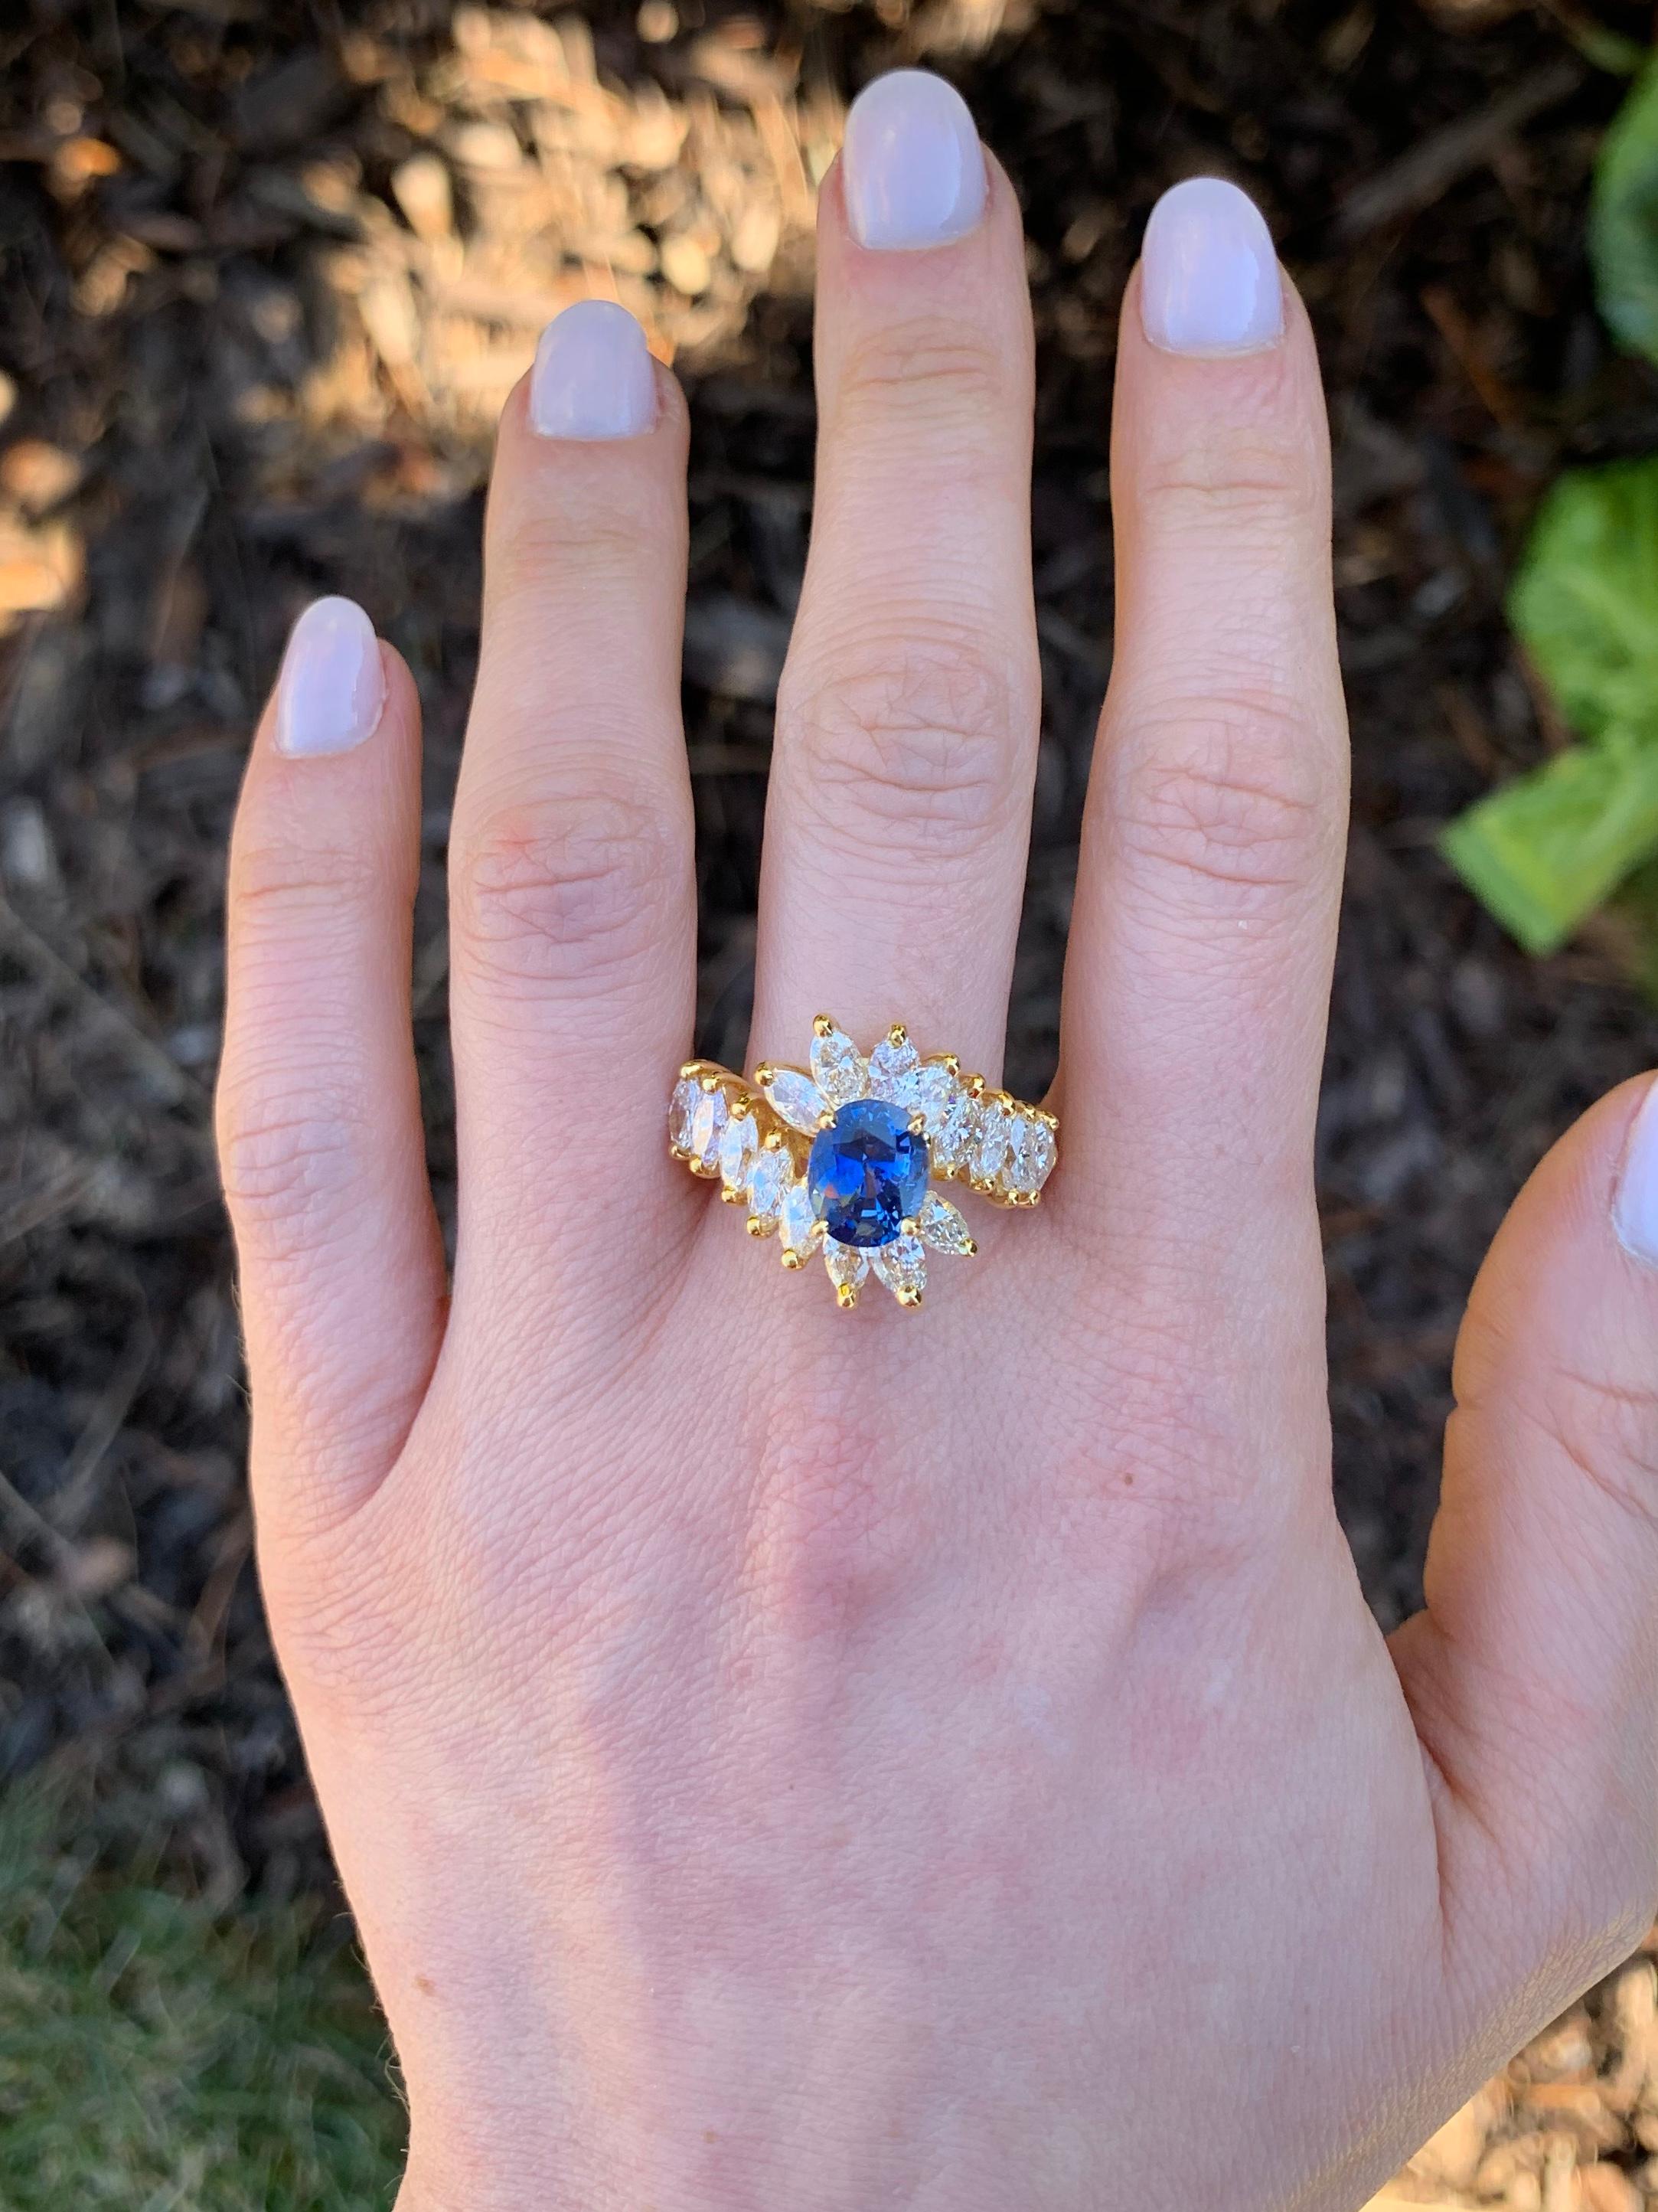 A beautifully saturated 2.09 carat oval blue sapphire is surrounded by sixteen prong-set marquise cut diamonds at 2.55 carats total weight. Diamonds are approximately G color, VS2 clarity. Oval blue sapphire has medium transparency and a beautiful